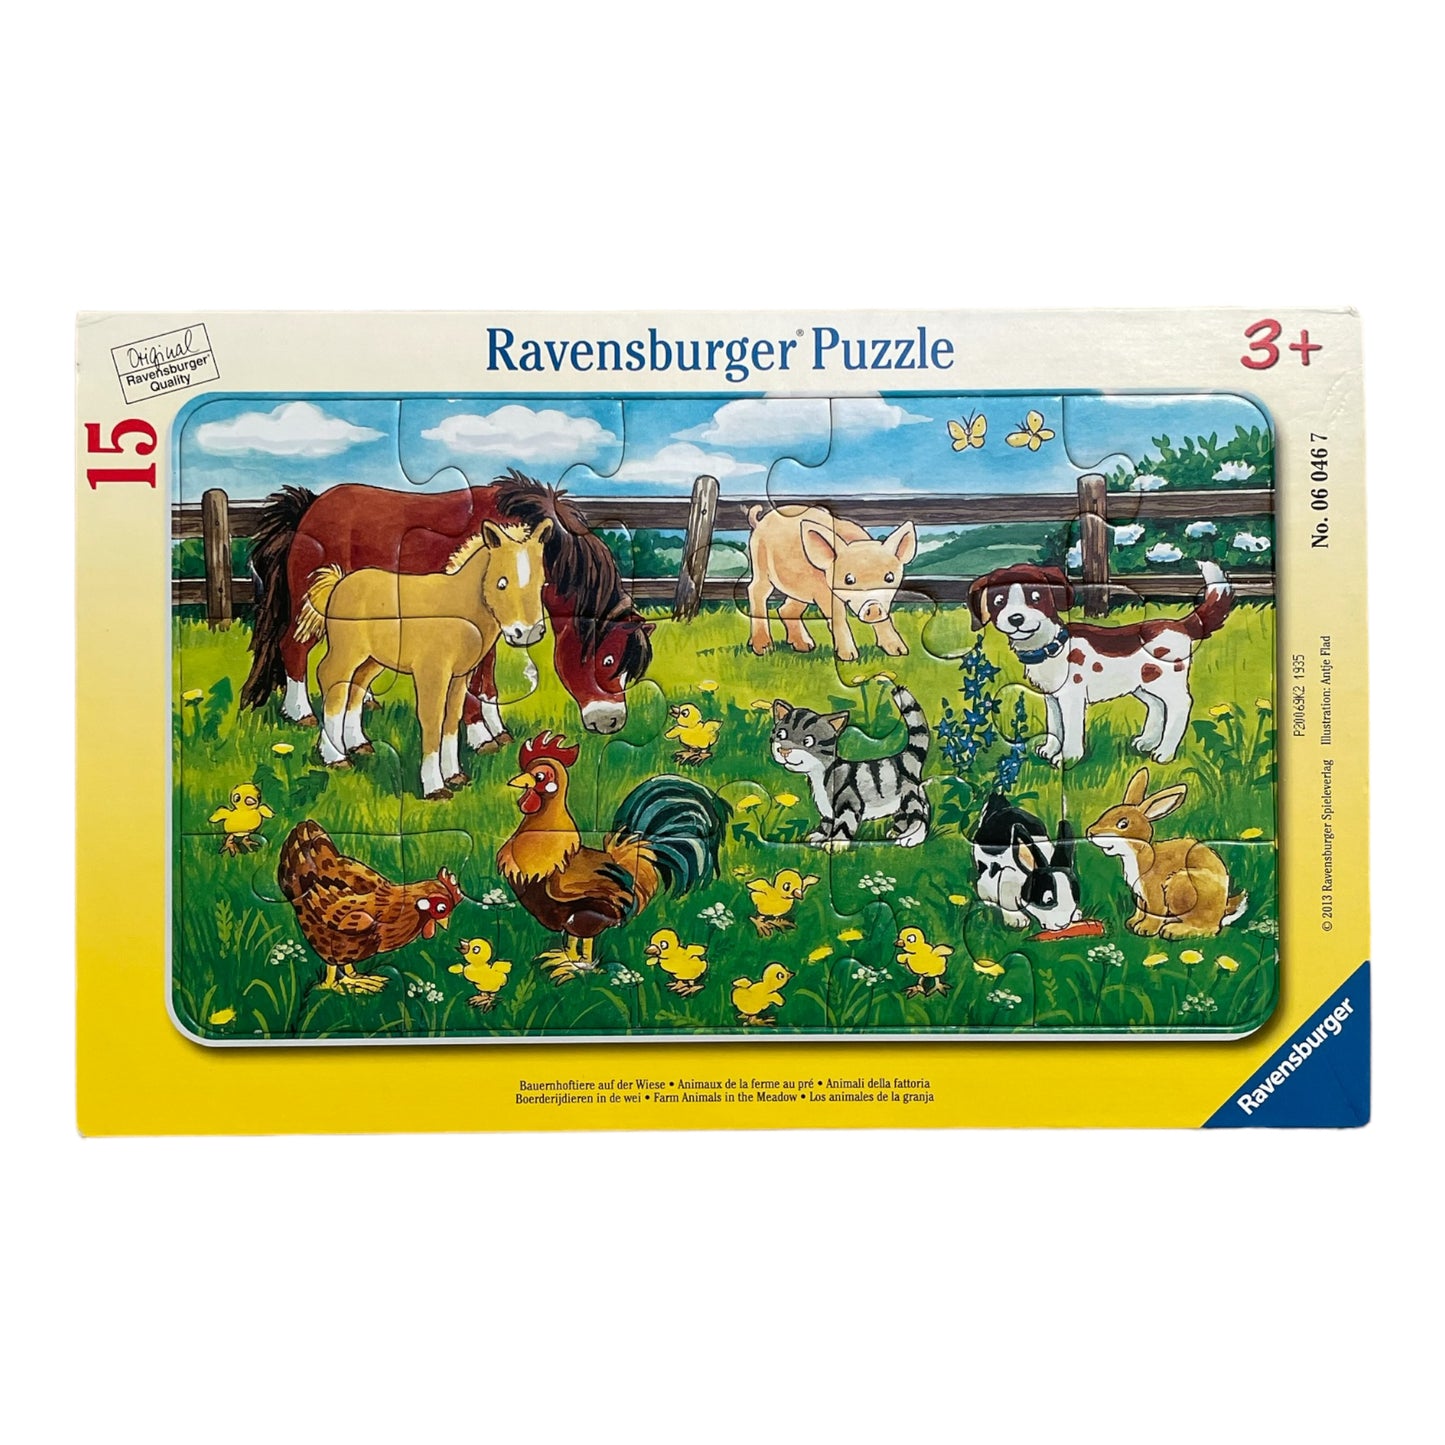 Ravensburger - Farm animals on the meadow - Puzzle - 15 Pieces